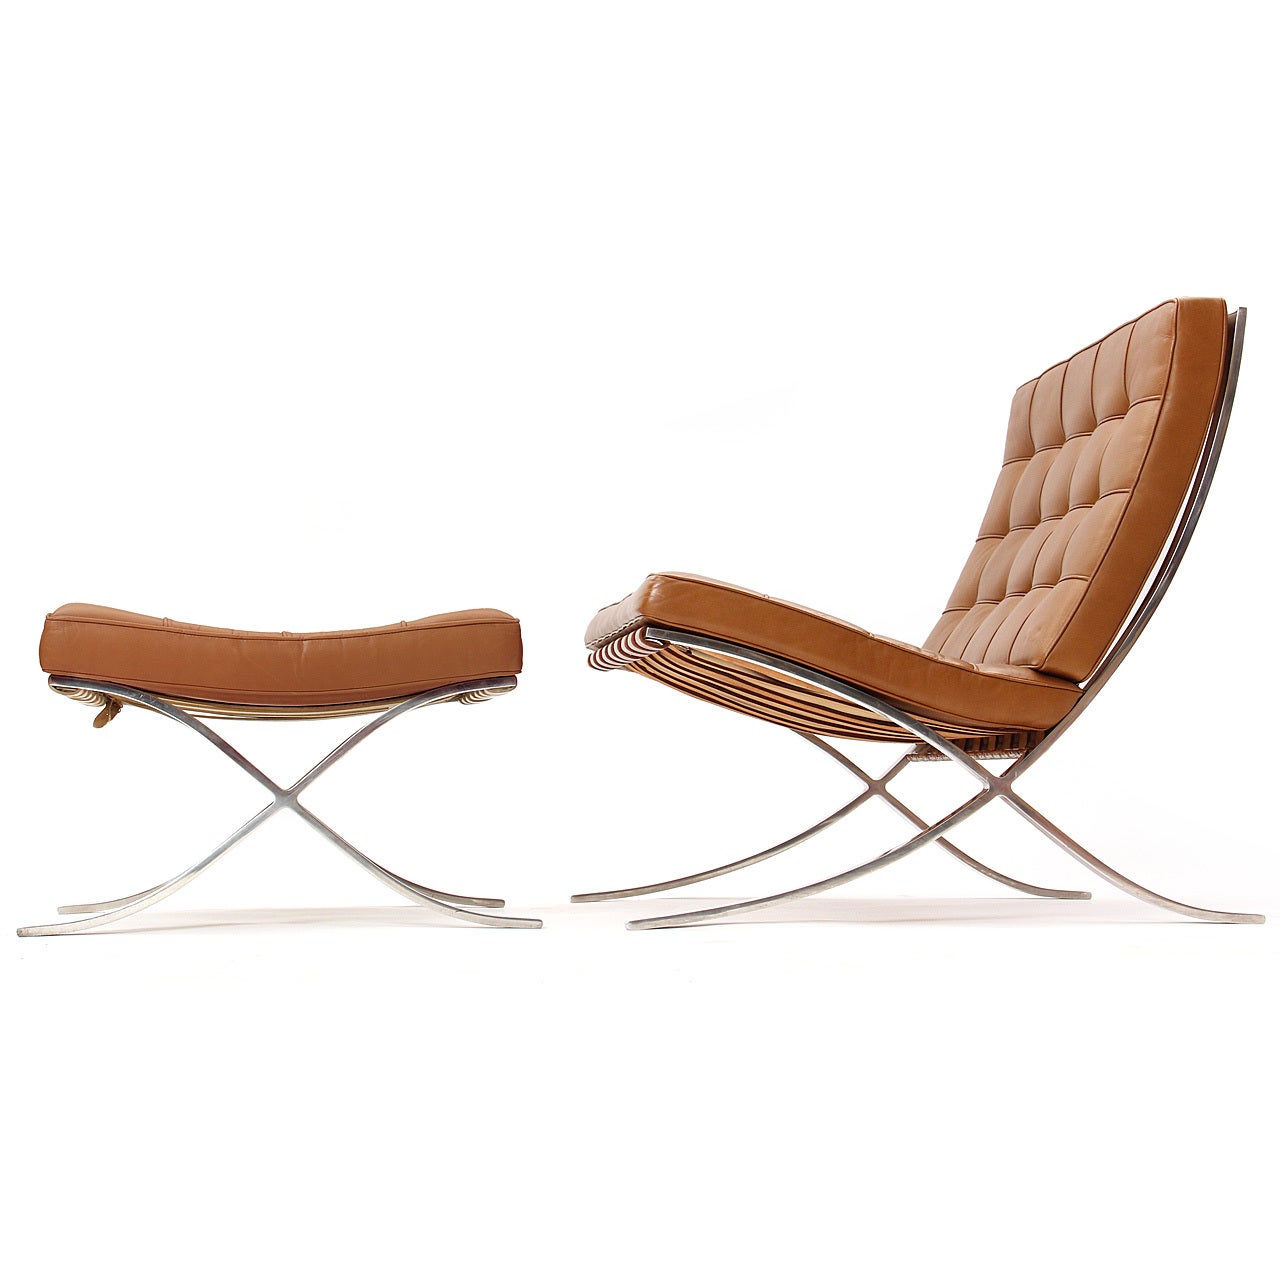 Barcelona Chair By Mies Van Der Rohe